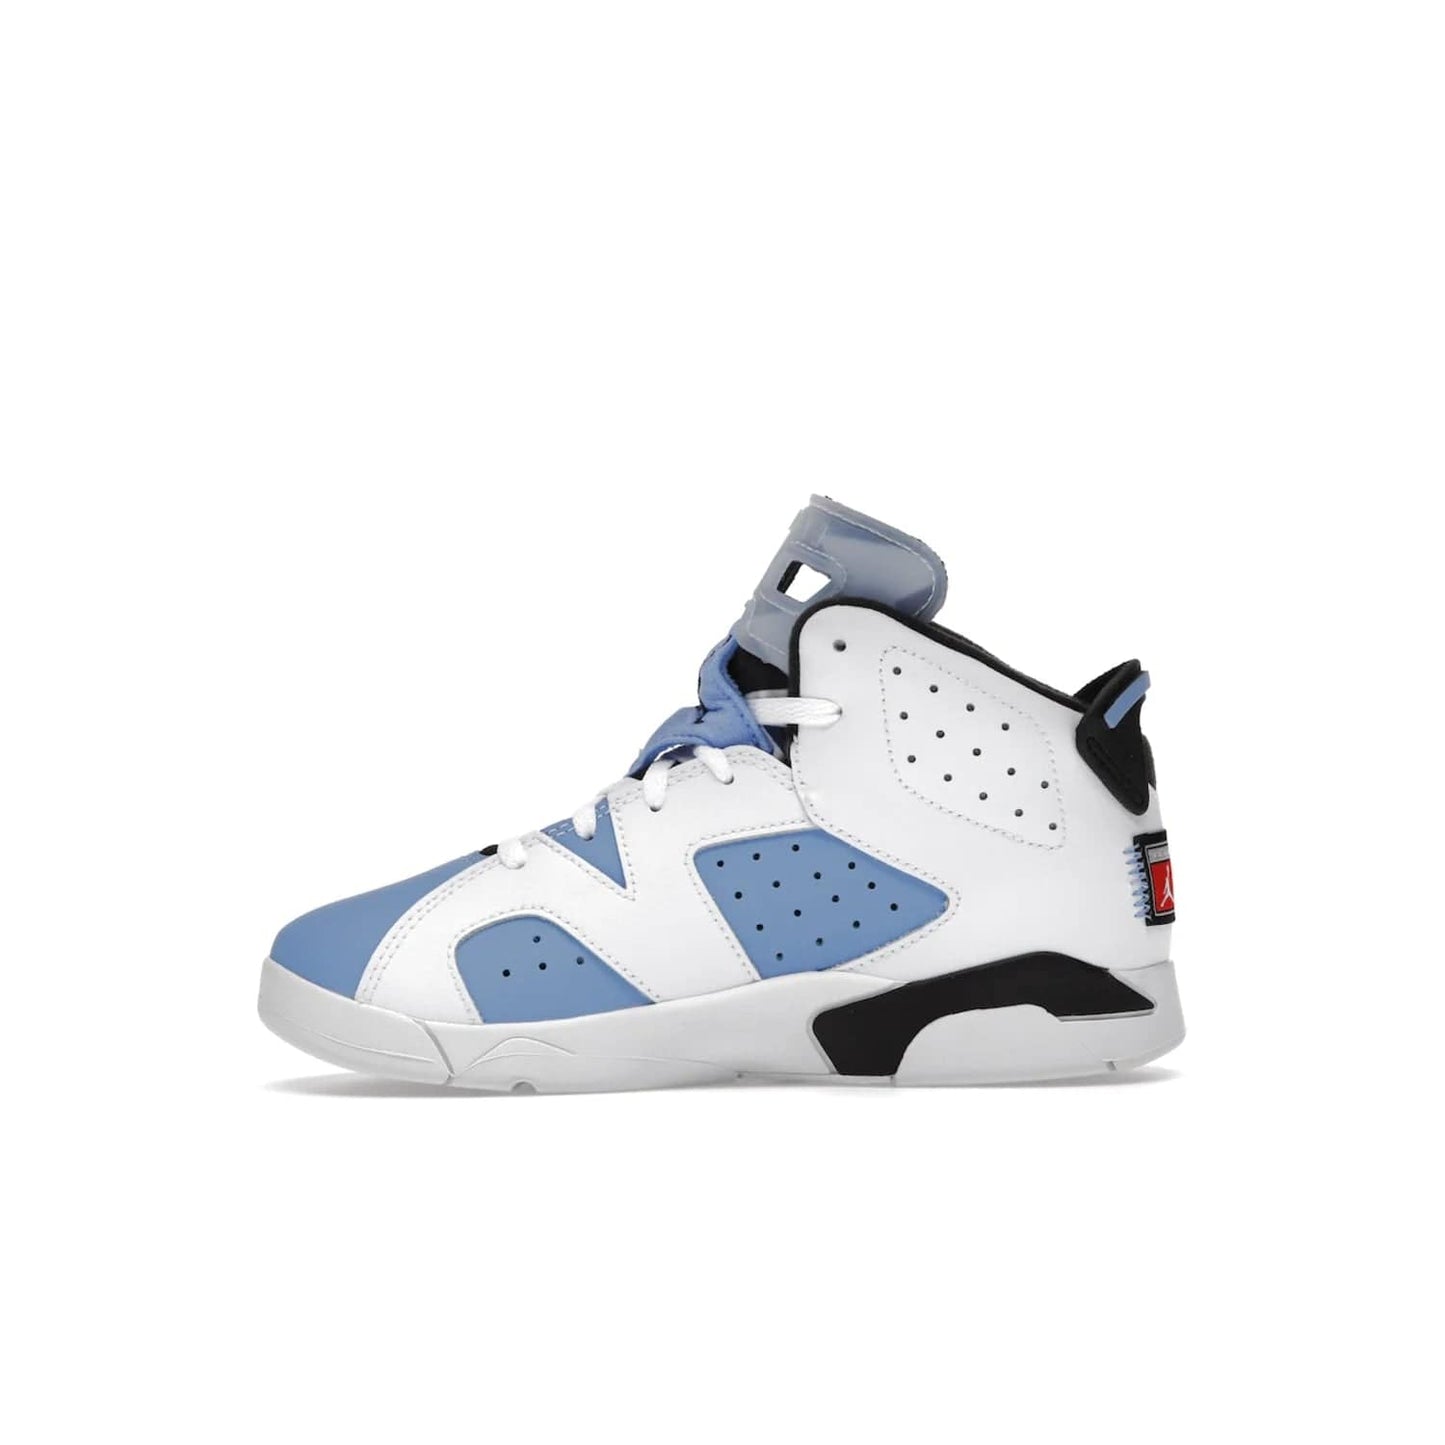 Jordan 6 Retro UNC White (PS) - Image 19 - Only at www.BallersClubKickz.com - The Air Jordan 6 Retro UNC White PS celebrates Michael Jordan's alma mater, the University of North Carolina. It features a classic color-blocking of the iconic Jordan 6 Carmine and a stitched Jordan Team patch. This must-have sneaker released on April 27th, 2022. Referencing the university colors, get this shoe for a stylish and timeless style with university pride.